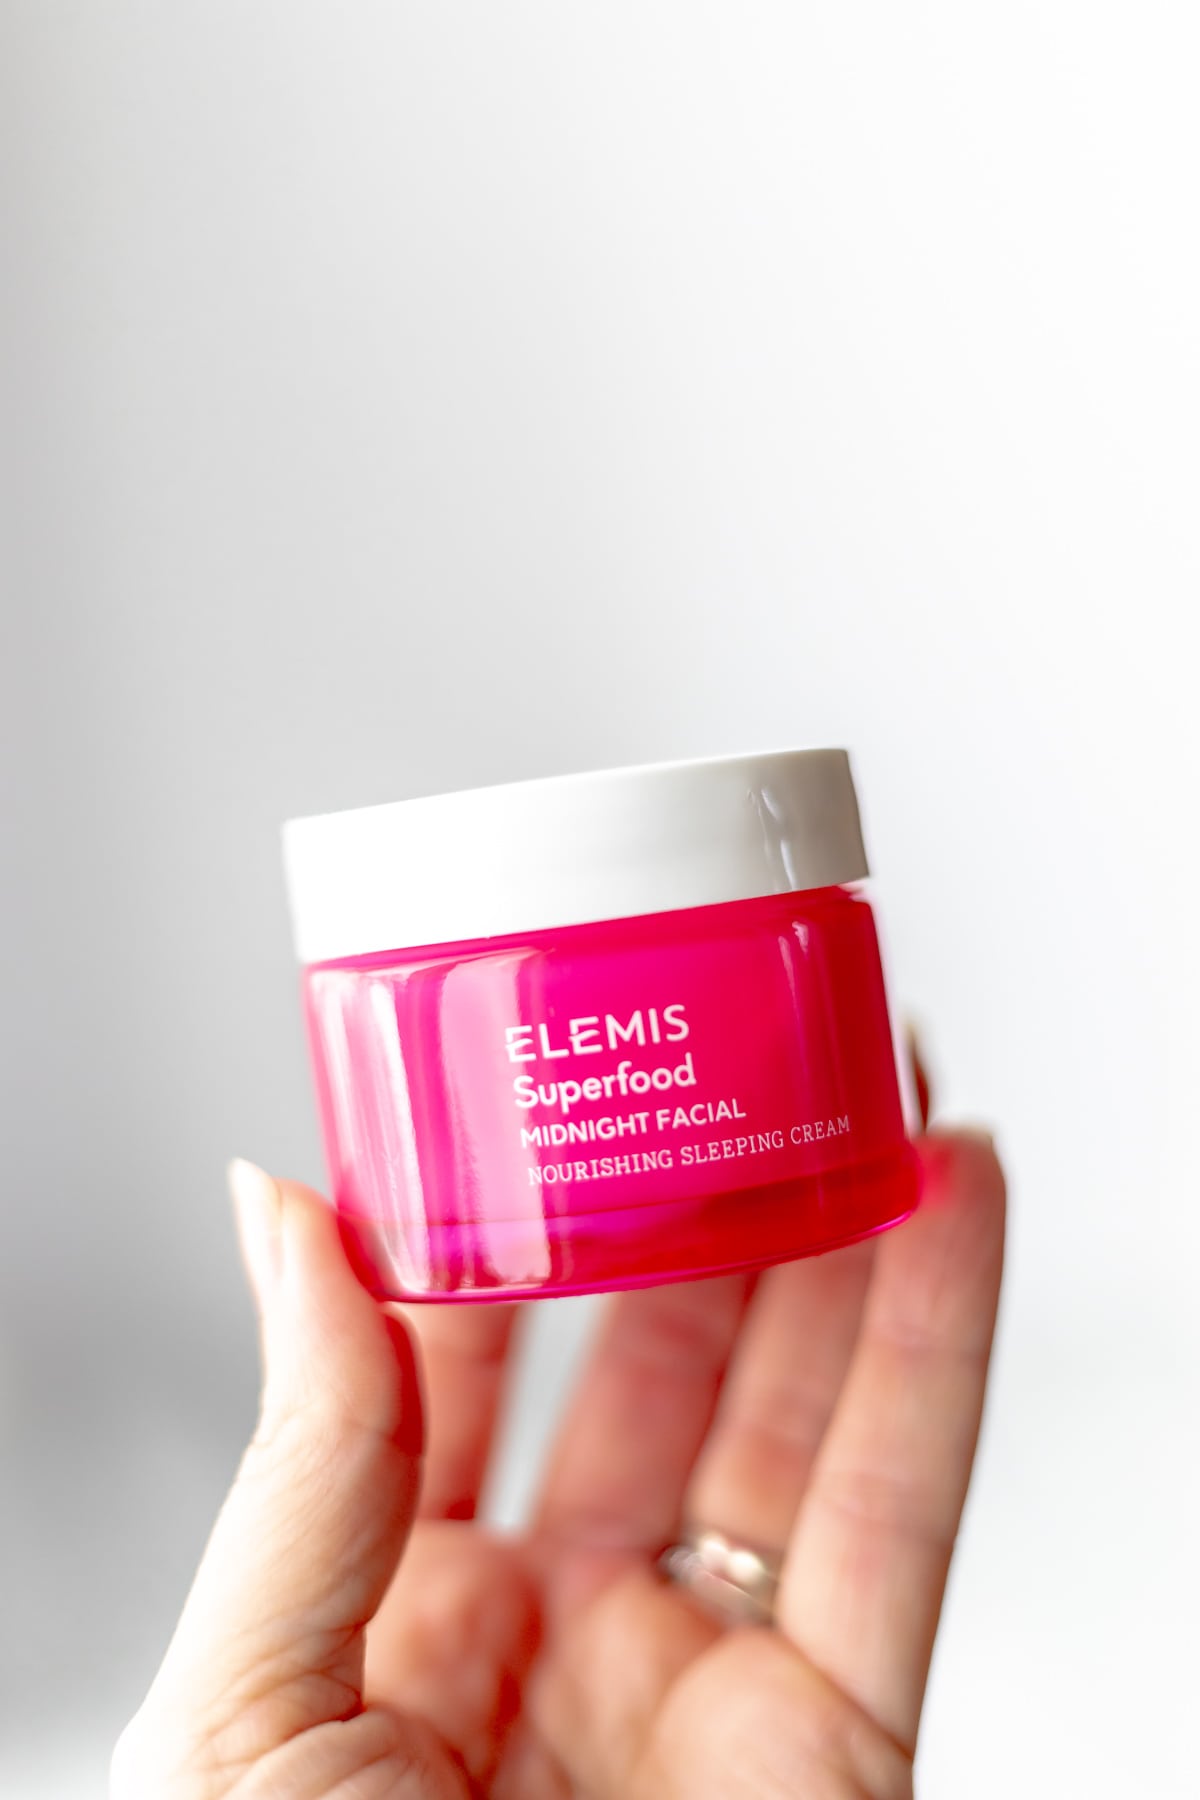 A hand holding up a jar of ELEMIS Midnight Facial over a light background.